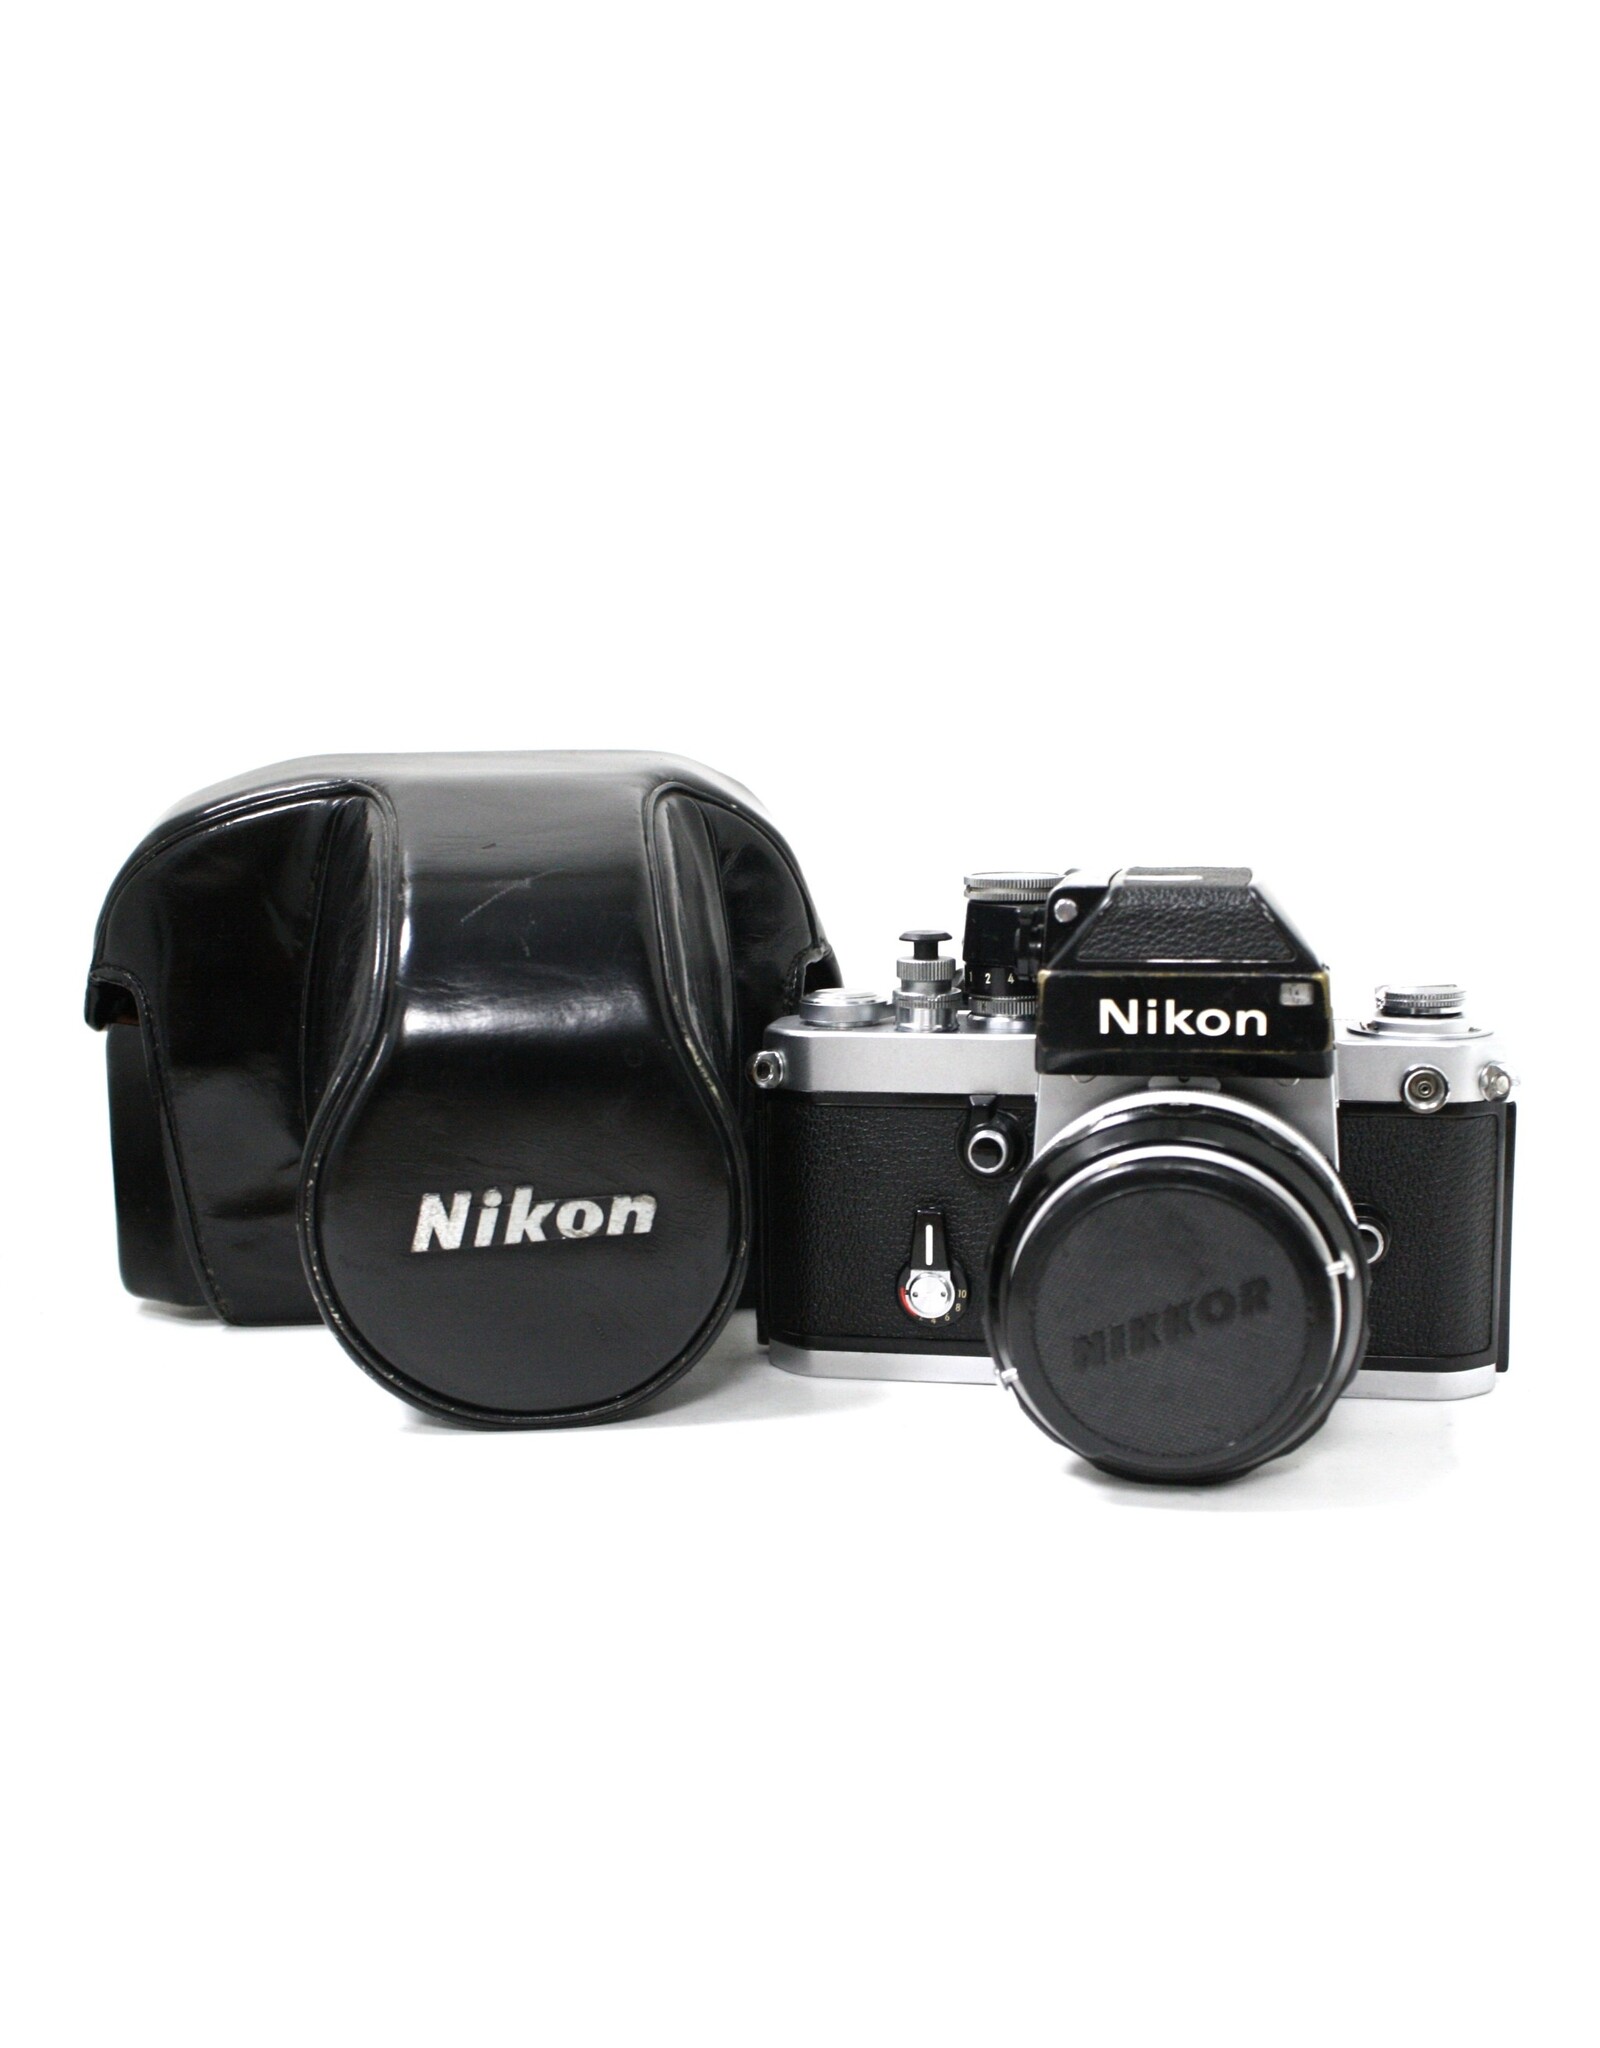 Nikon Nikon F2 Film Camera w/ 50mm 1.4 Lens (Meter NG) (Missing Bottom Cover) with Case (Pre-Owned